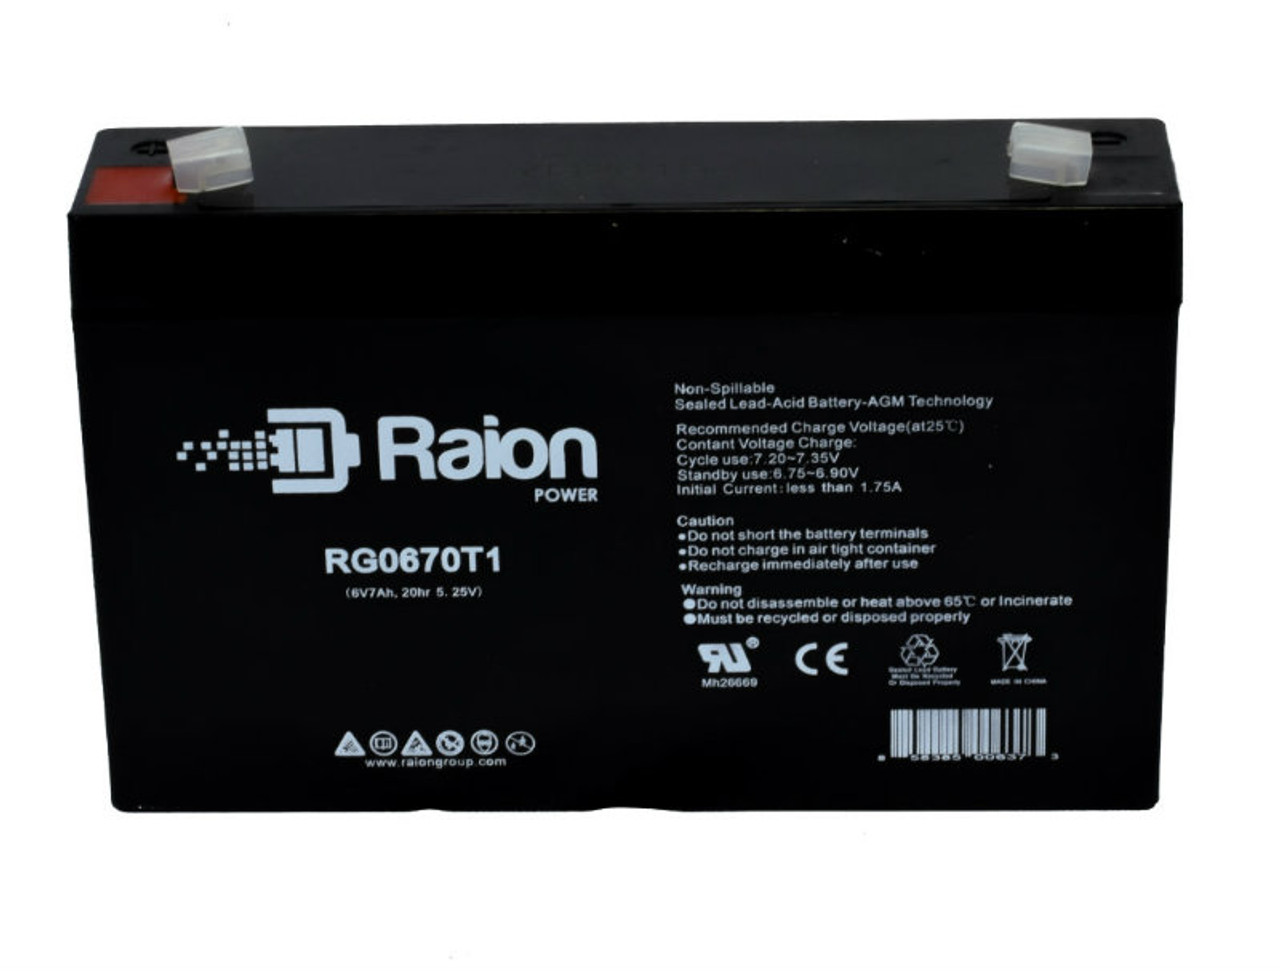 Raion Power RG0670T1 Replacement Battery Cartridge for Technacell EP66526